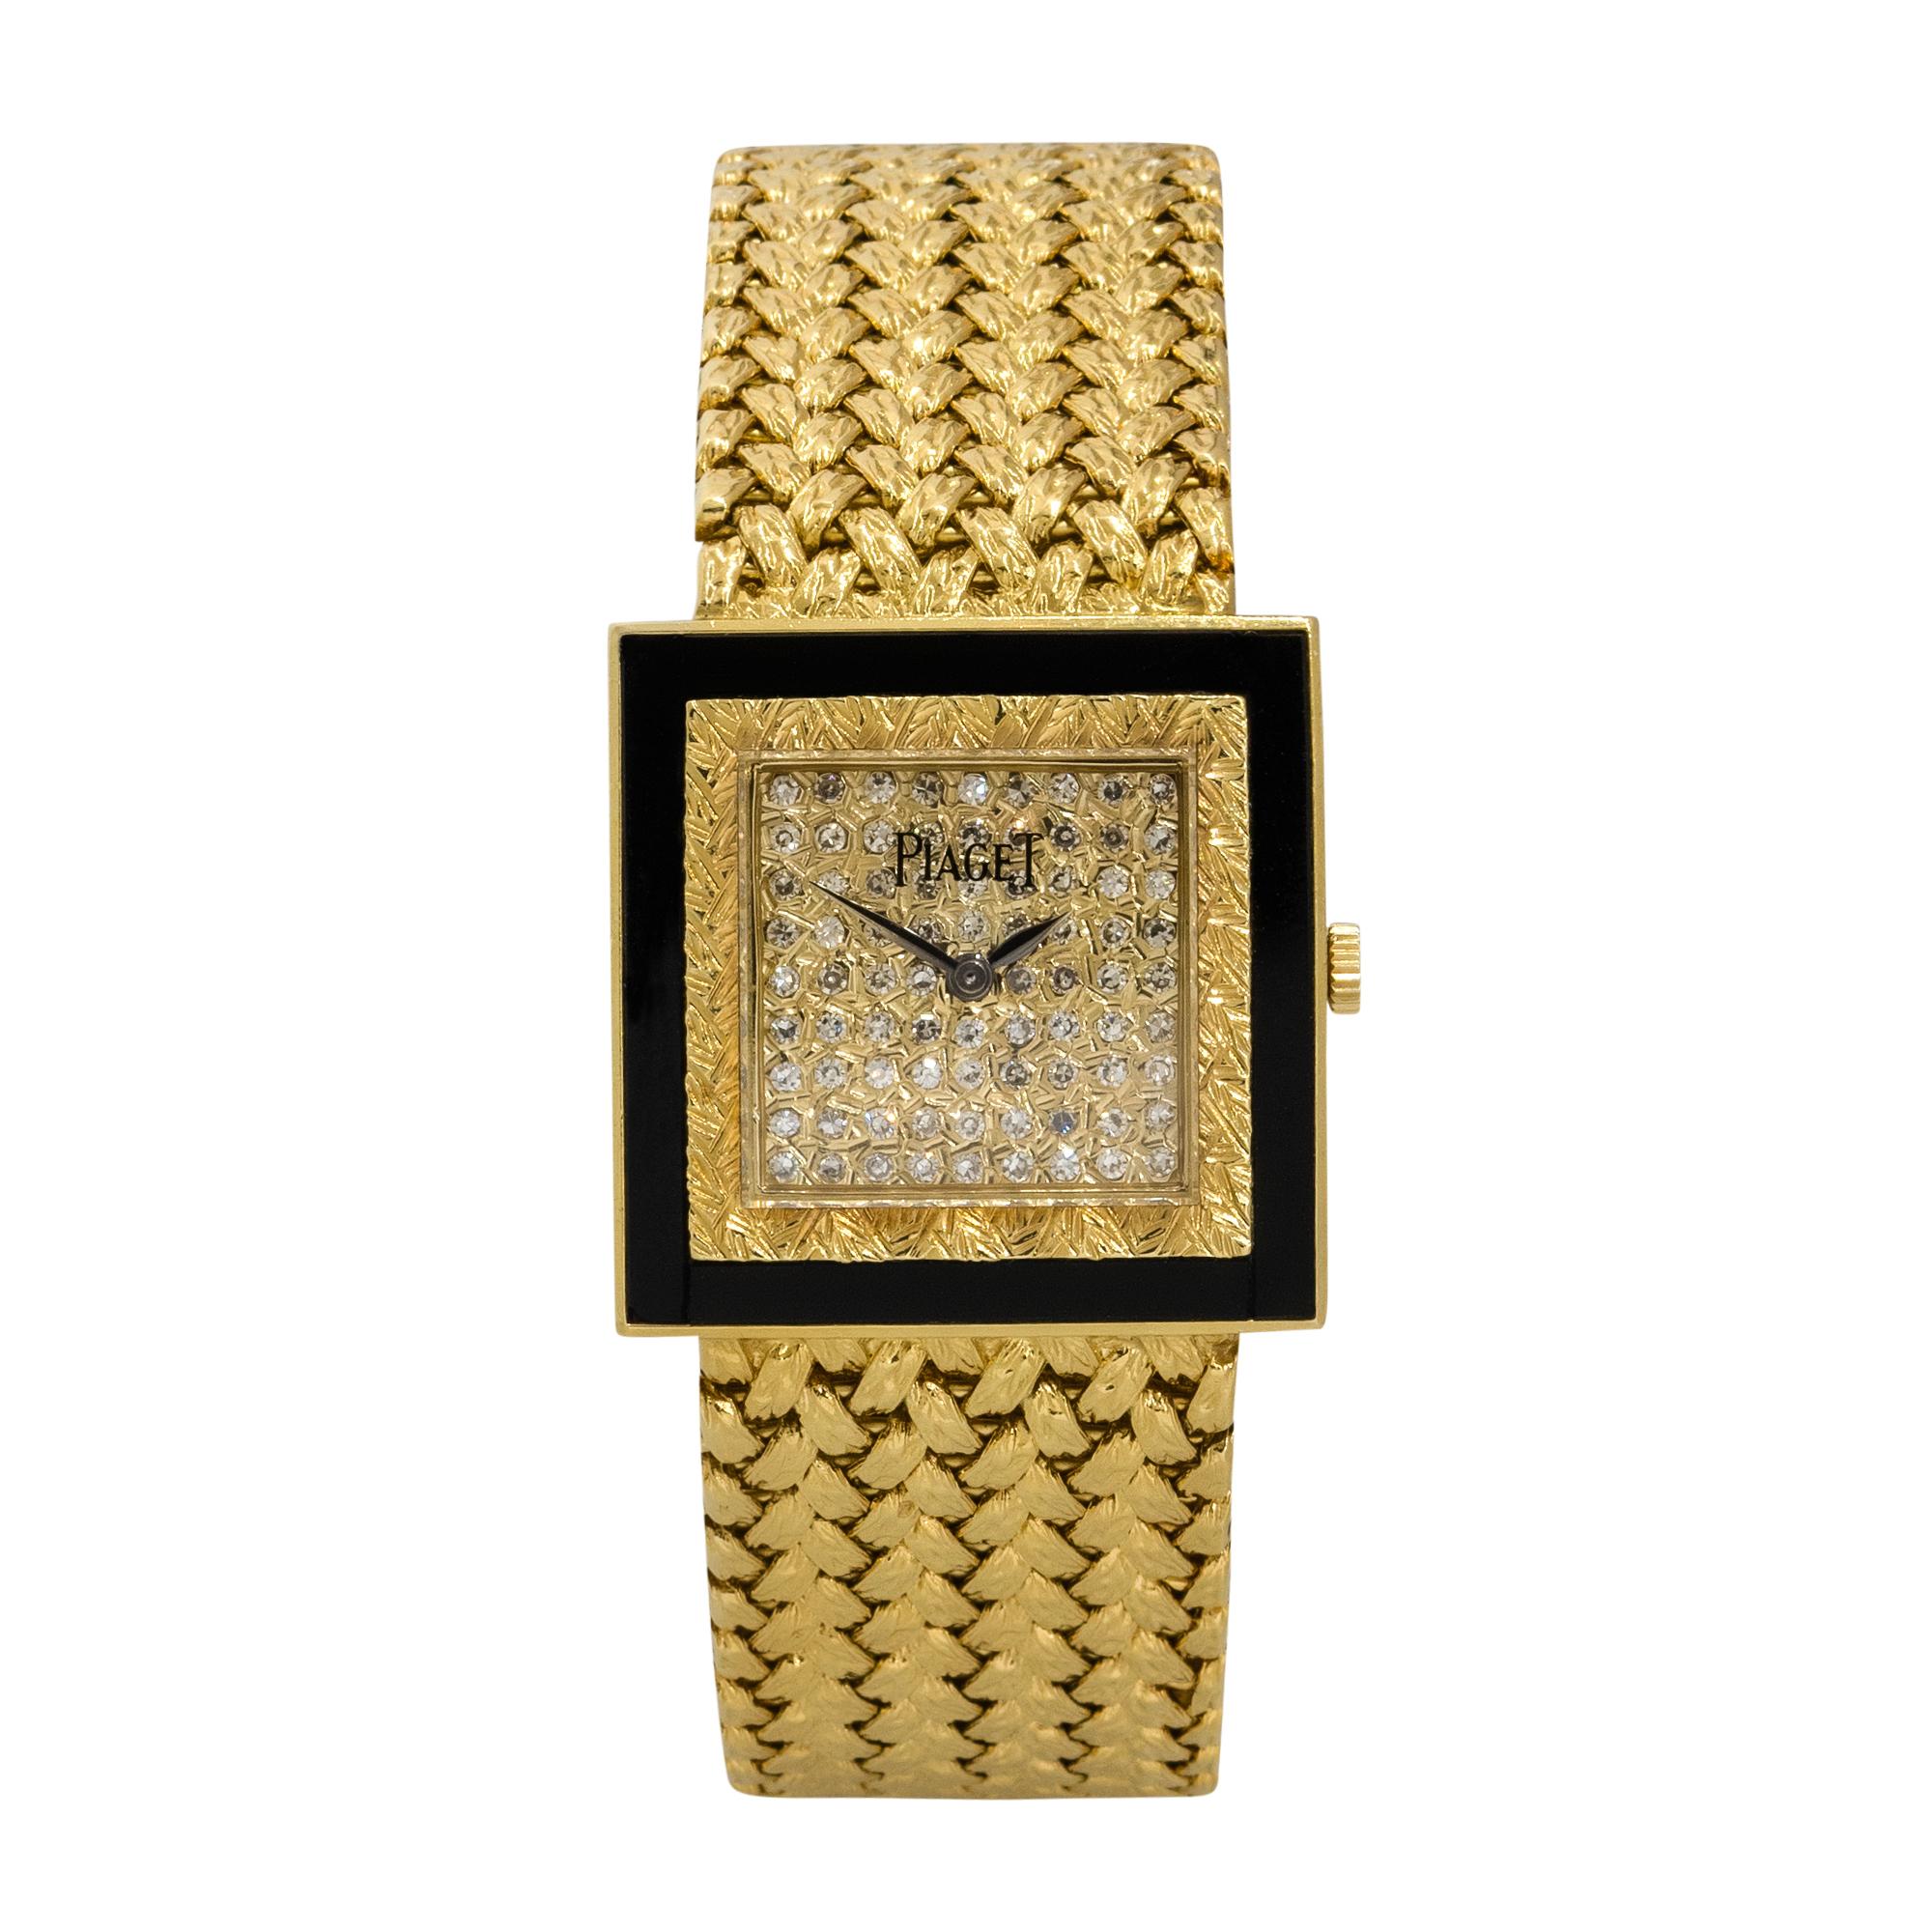 Brand: Piaget
Case Material: 18k Yellow Gold
Case Diameter: 25mm
Crystal: Sapphire Crystal
Bezel: 18k Yellow gold bezel with black Onyx
Dial: 18k yellow gold dial with Diamond pave center
Bracelet: 18k Yellow Gold
Size: Will fit a 5.5